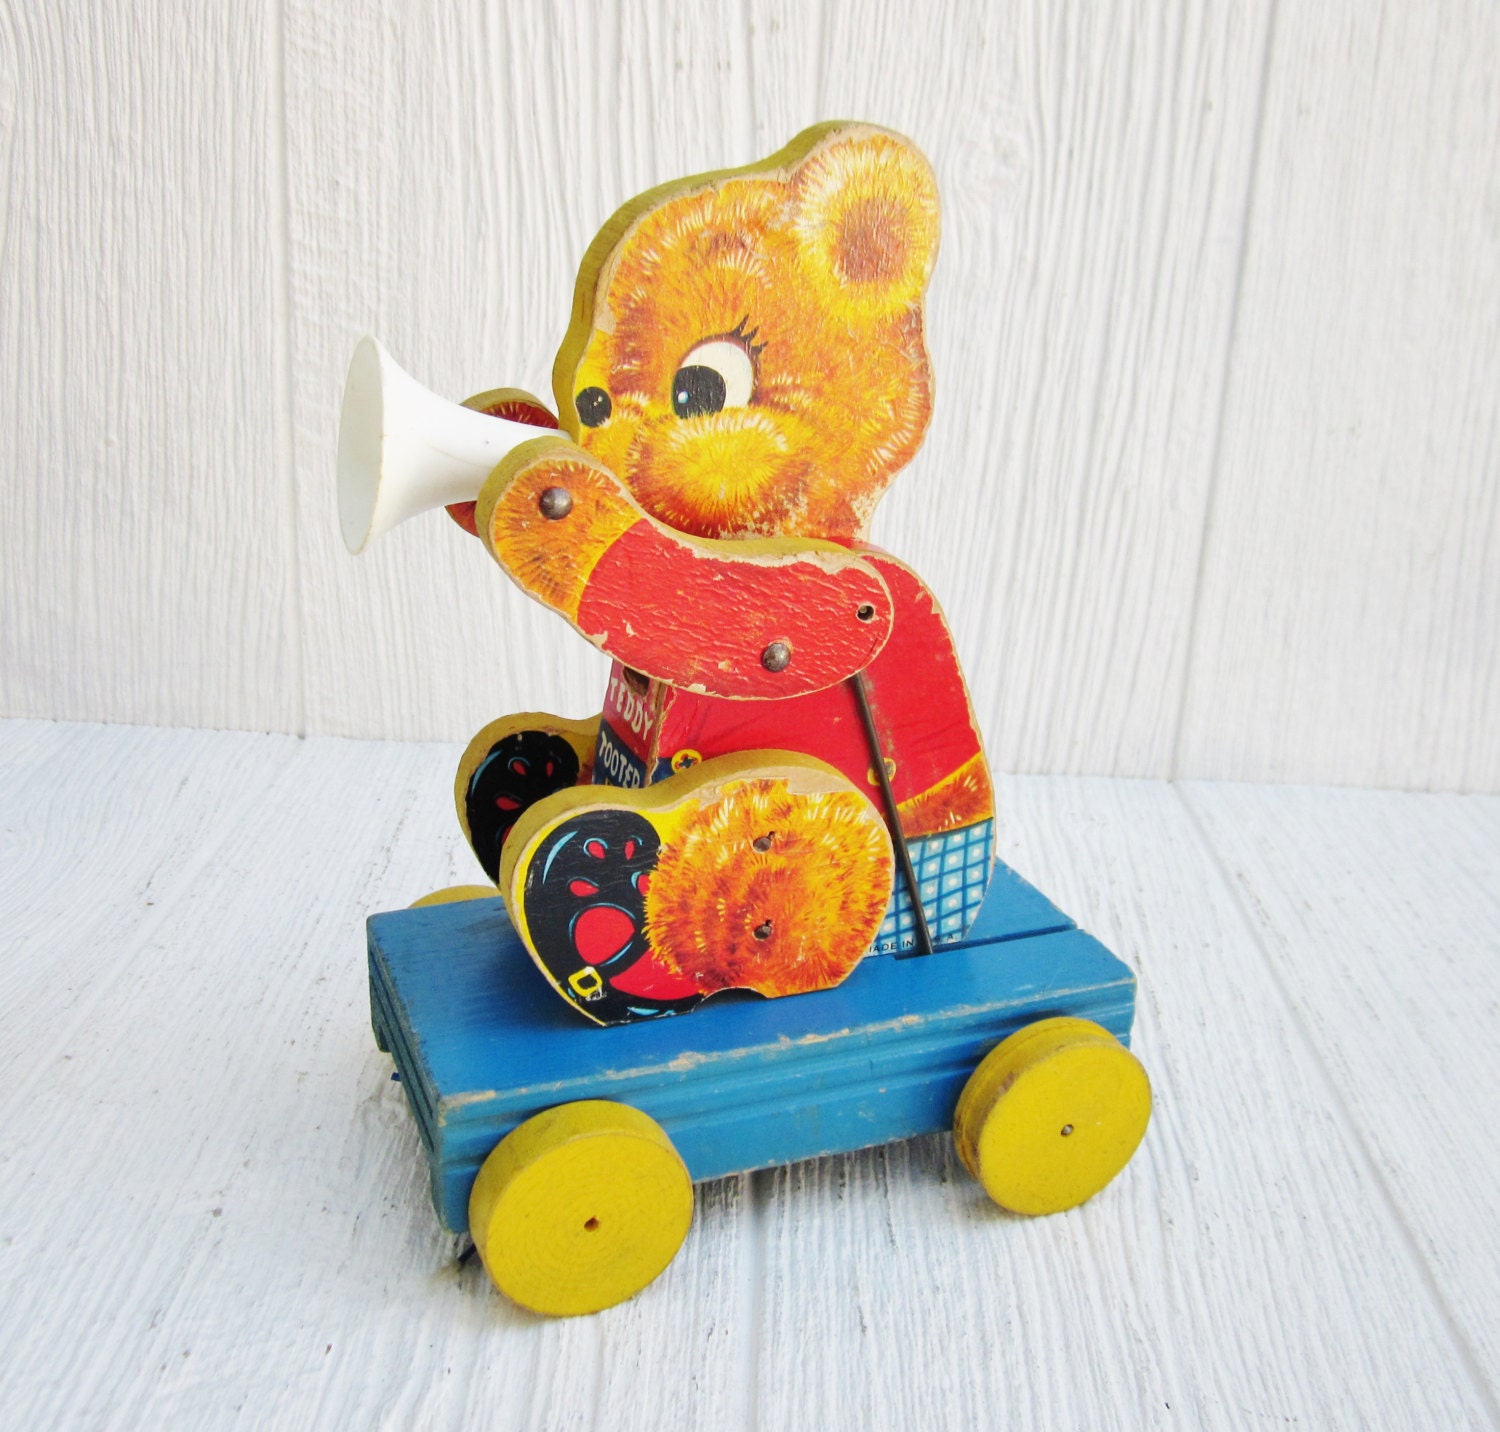 Vintage Fisher Price Wooden Pull Toy 1950's Teddy Tooter